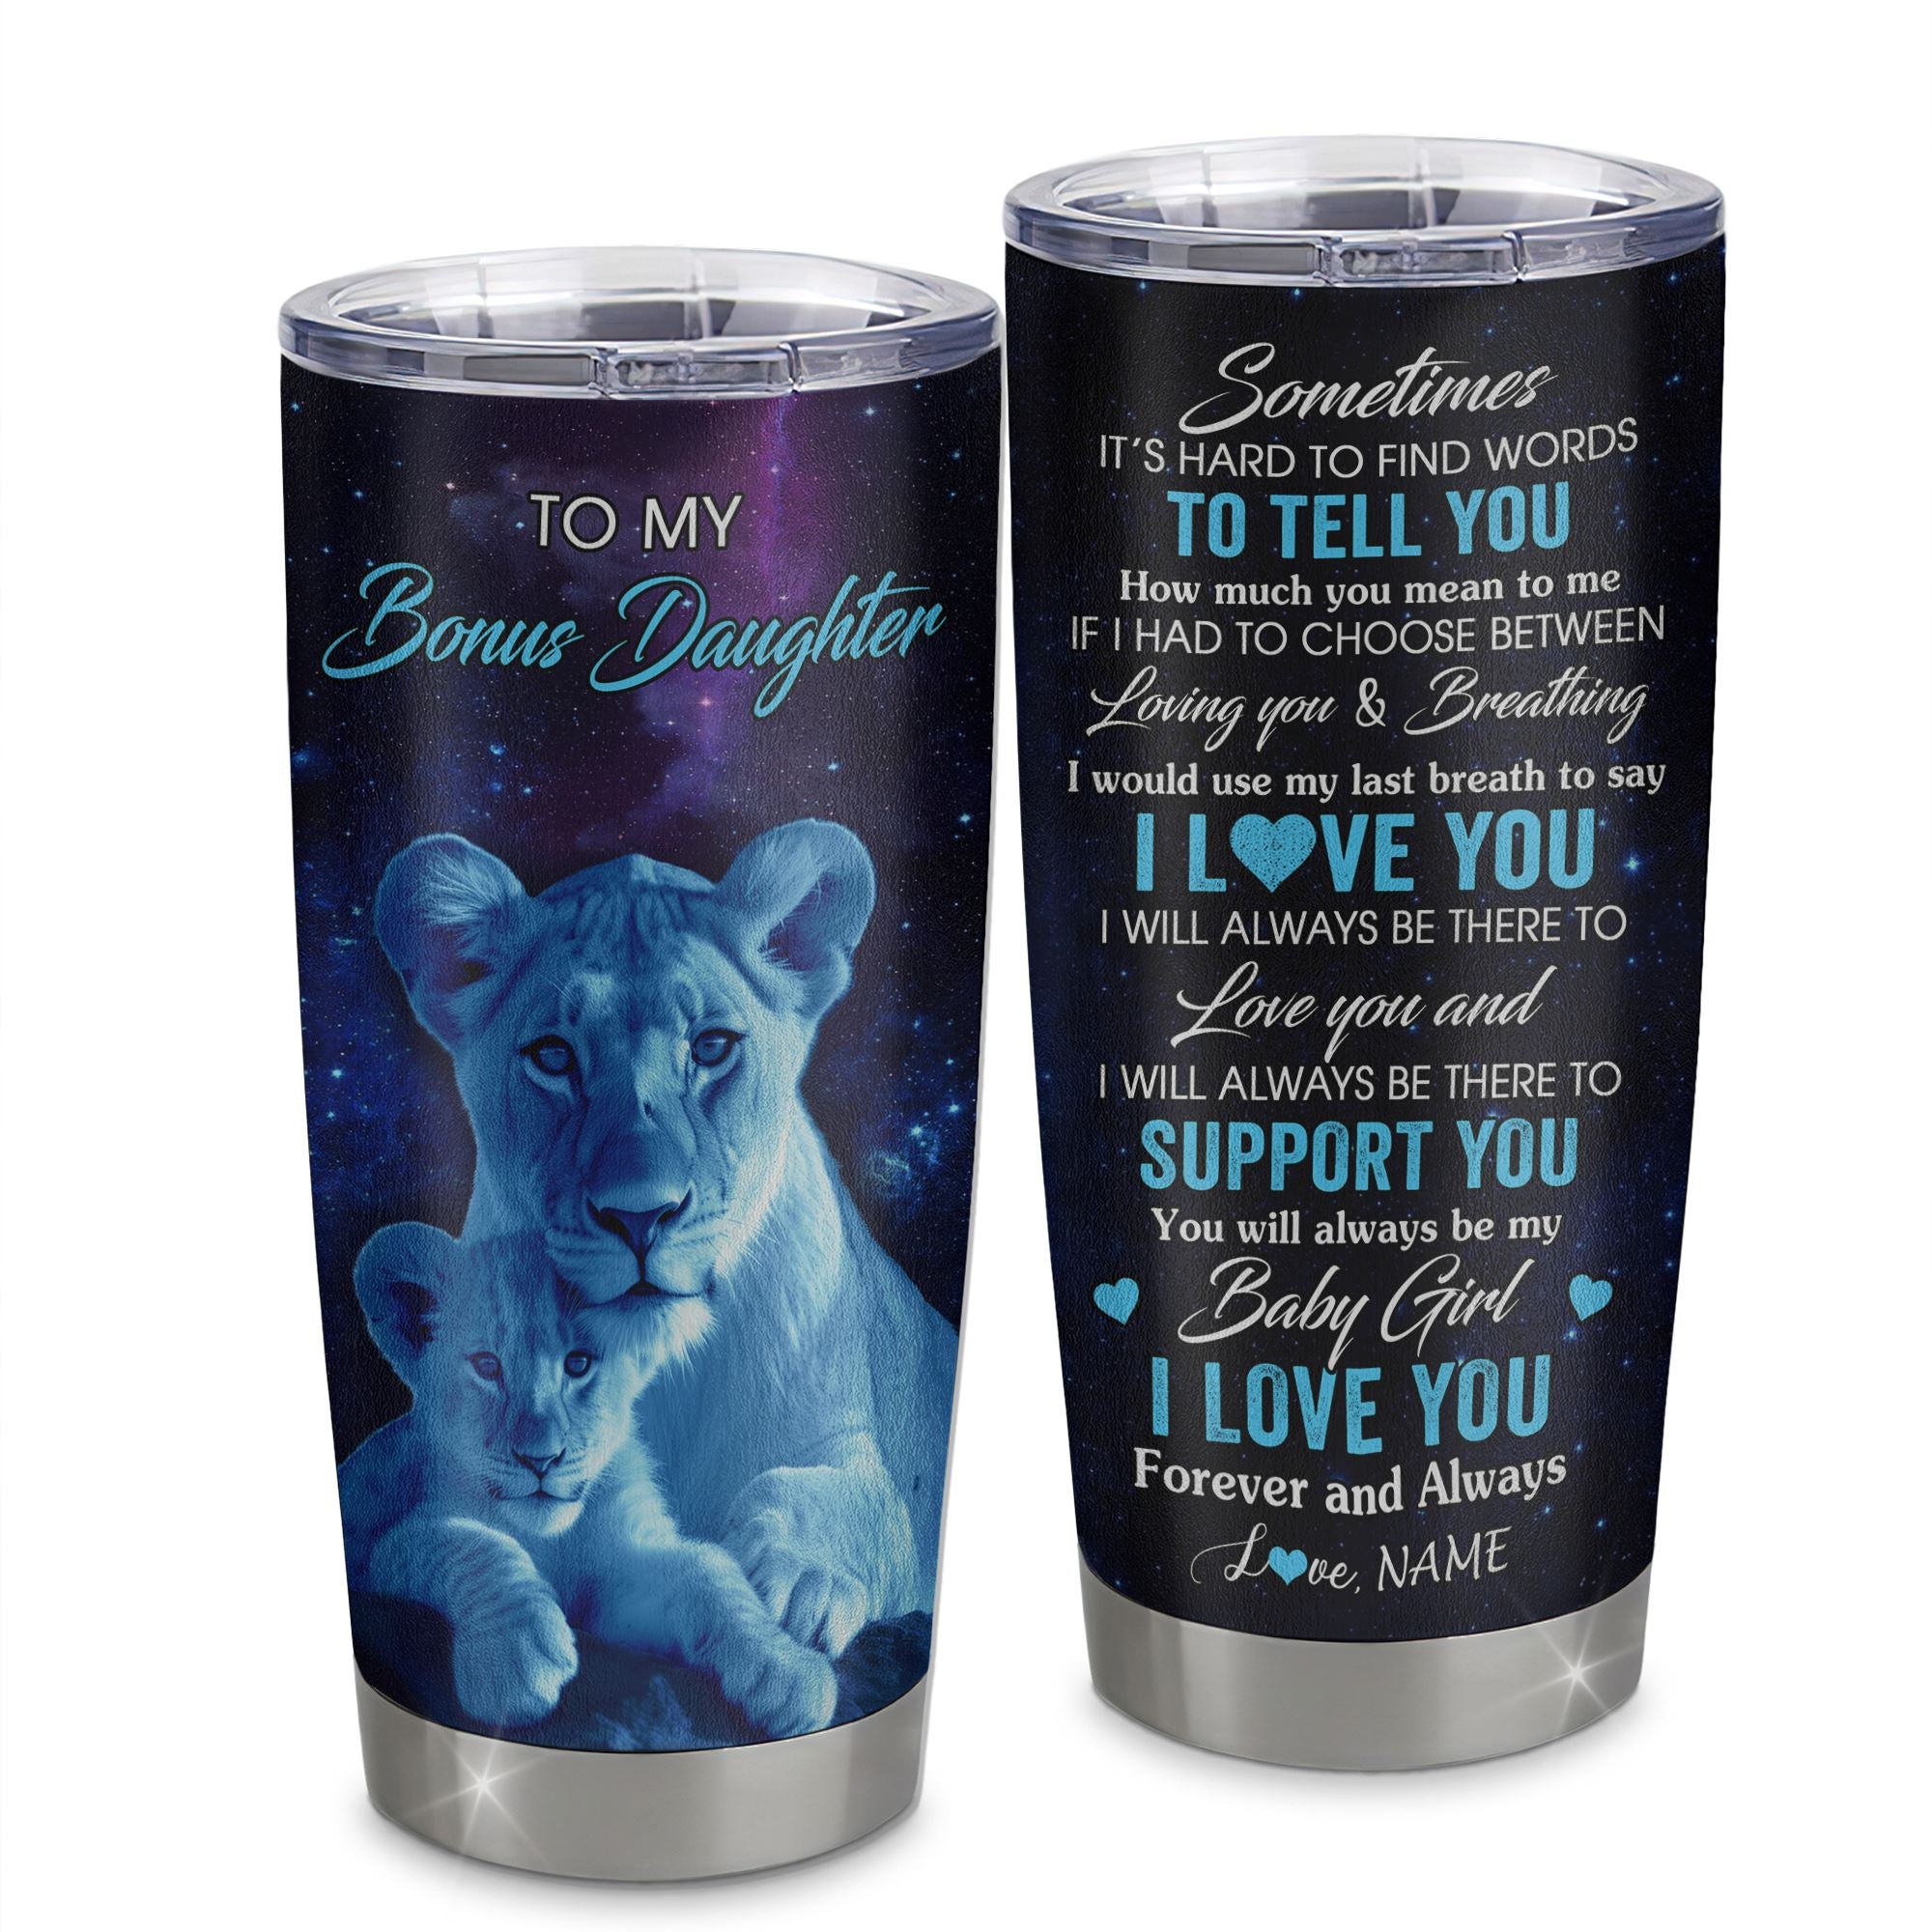 Personalized_To_My_Bonus_Daughter_Tumbler_From_Stepmother_Stainless_Steel_Cup_Sometimes_It_s_Hard_Lion_Stepdaughter_Gift_Birthday_Graduation_Christmas_Custom_Travel_Mug_Tumbler_mockup-1.jpg